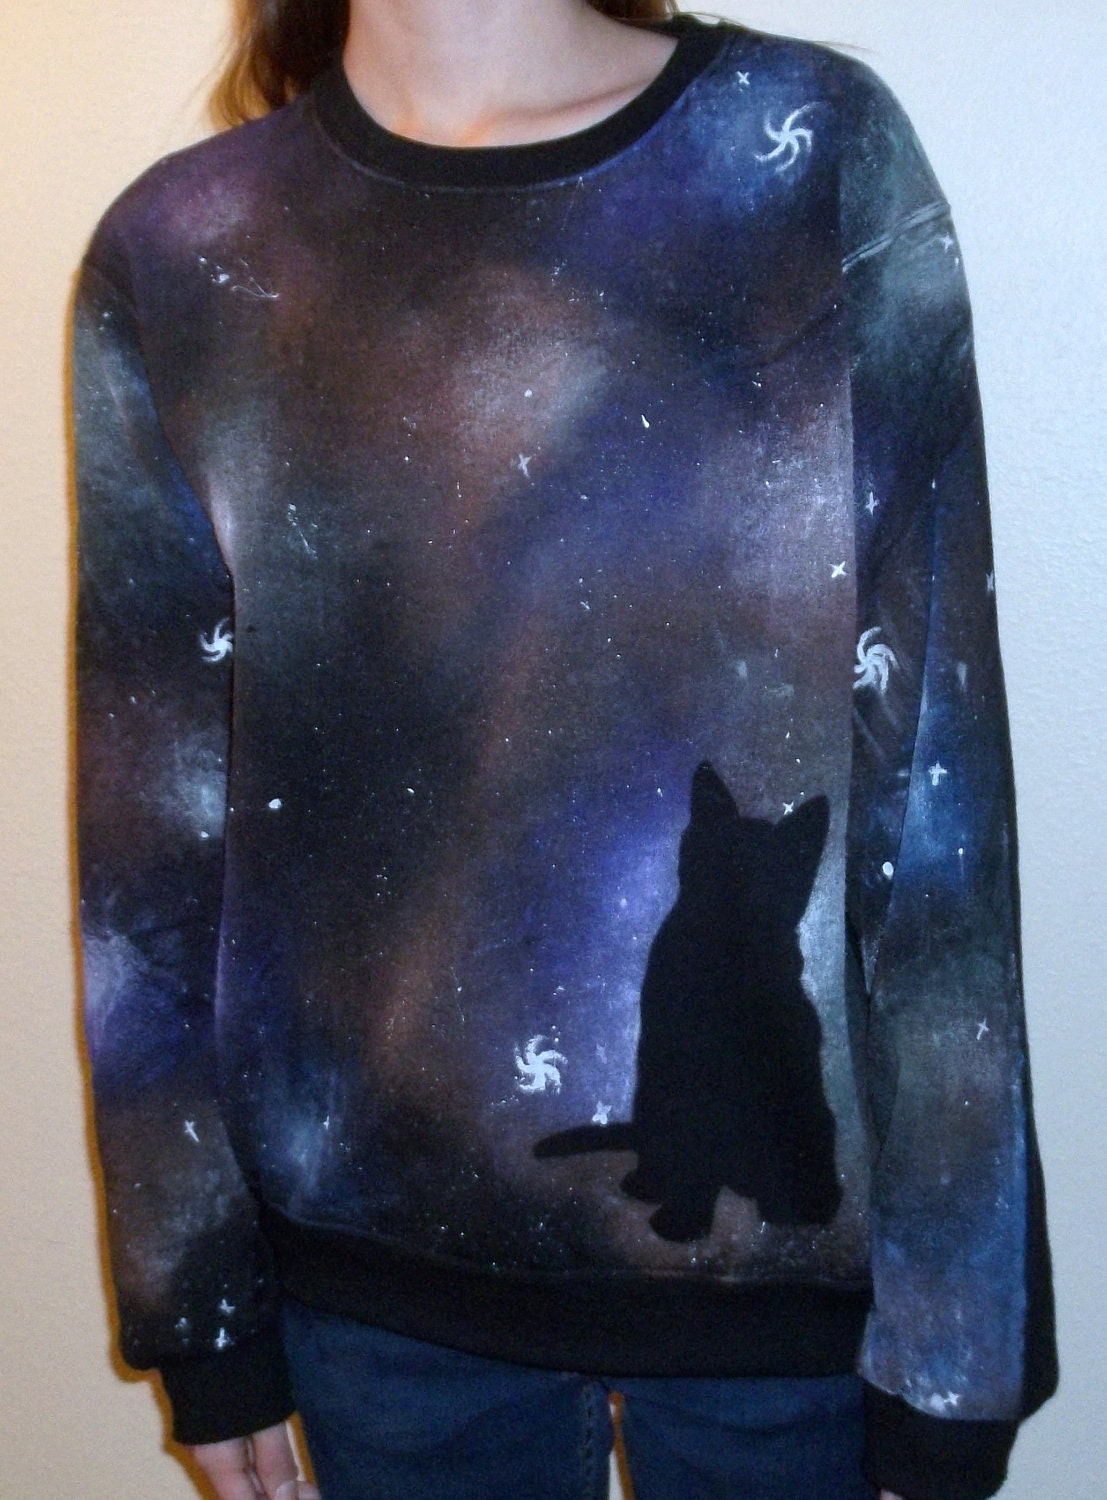 Multicolored Cat Galaxy Cosmos Sweater available in XL and XXL